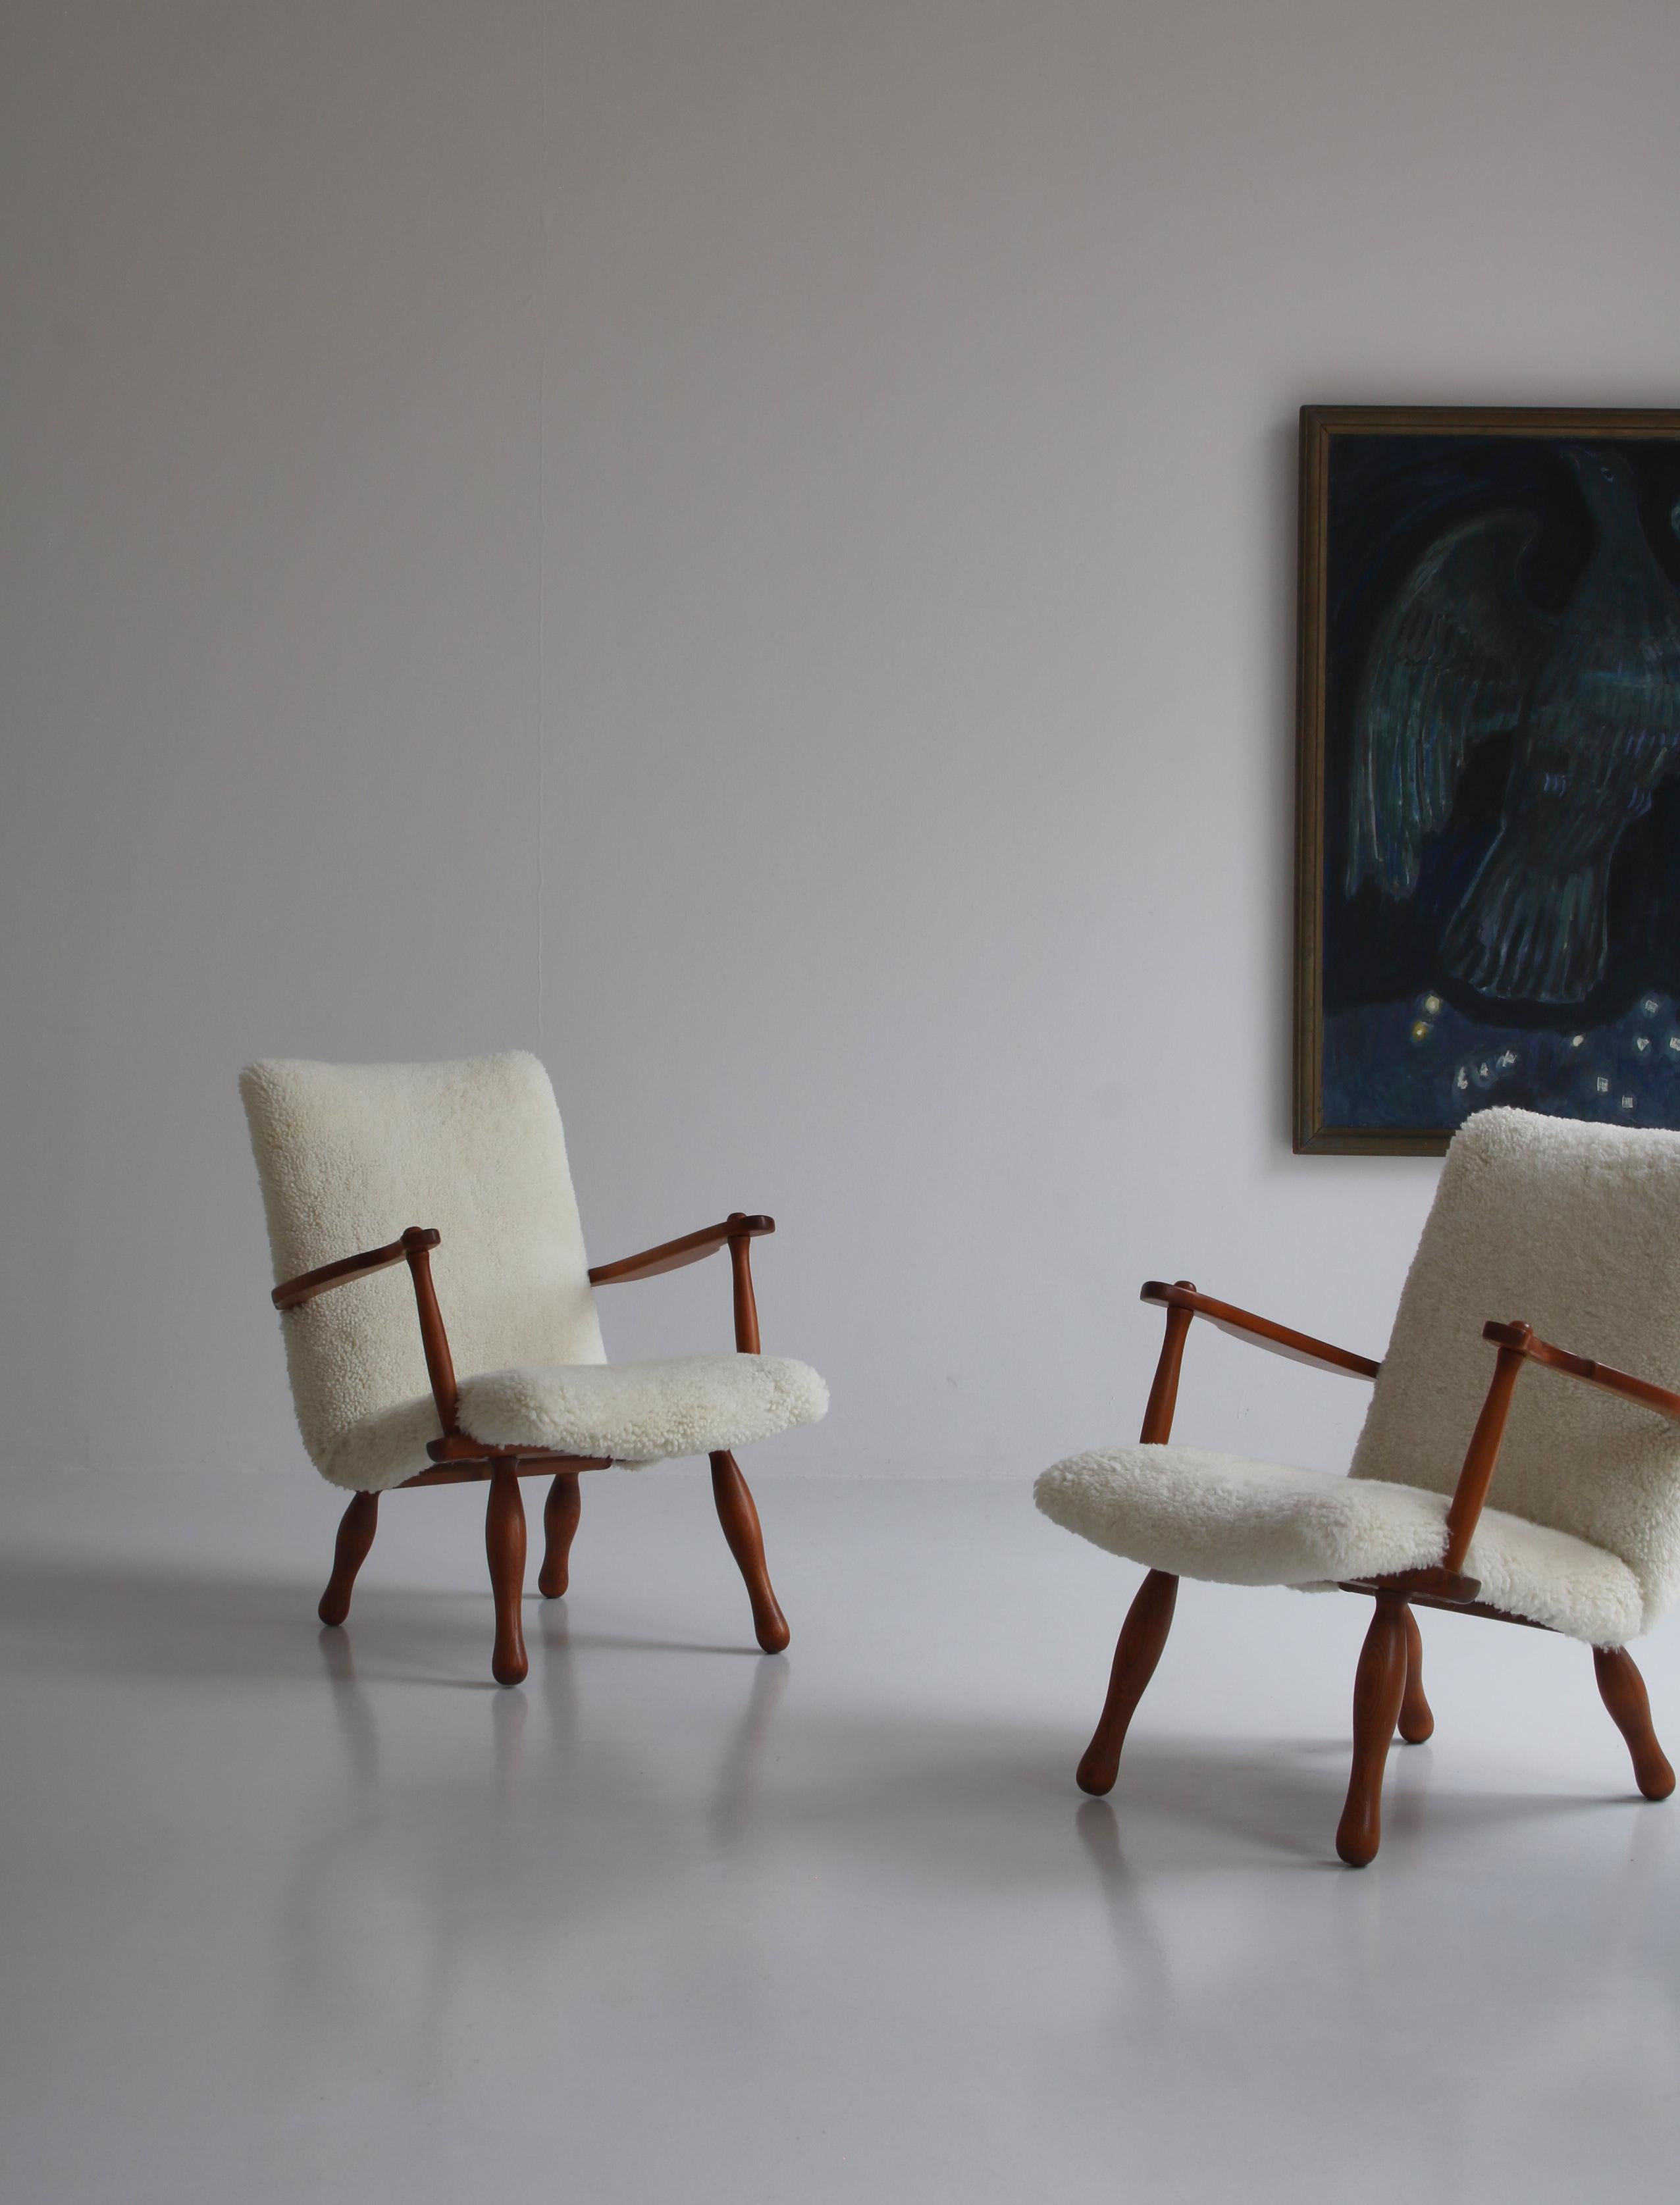 An amazing and rare pair of original lounge chairs made in Sweden in the 1940s in the typical Swedish 